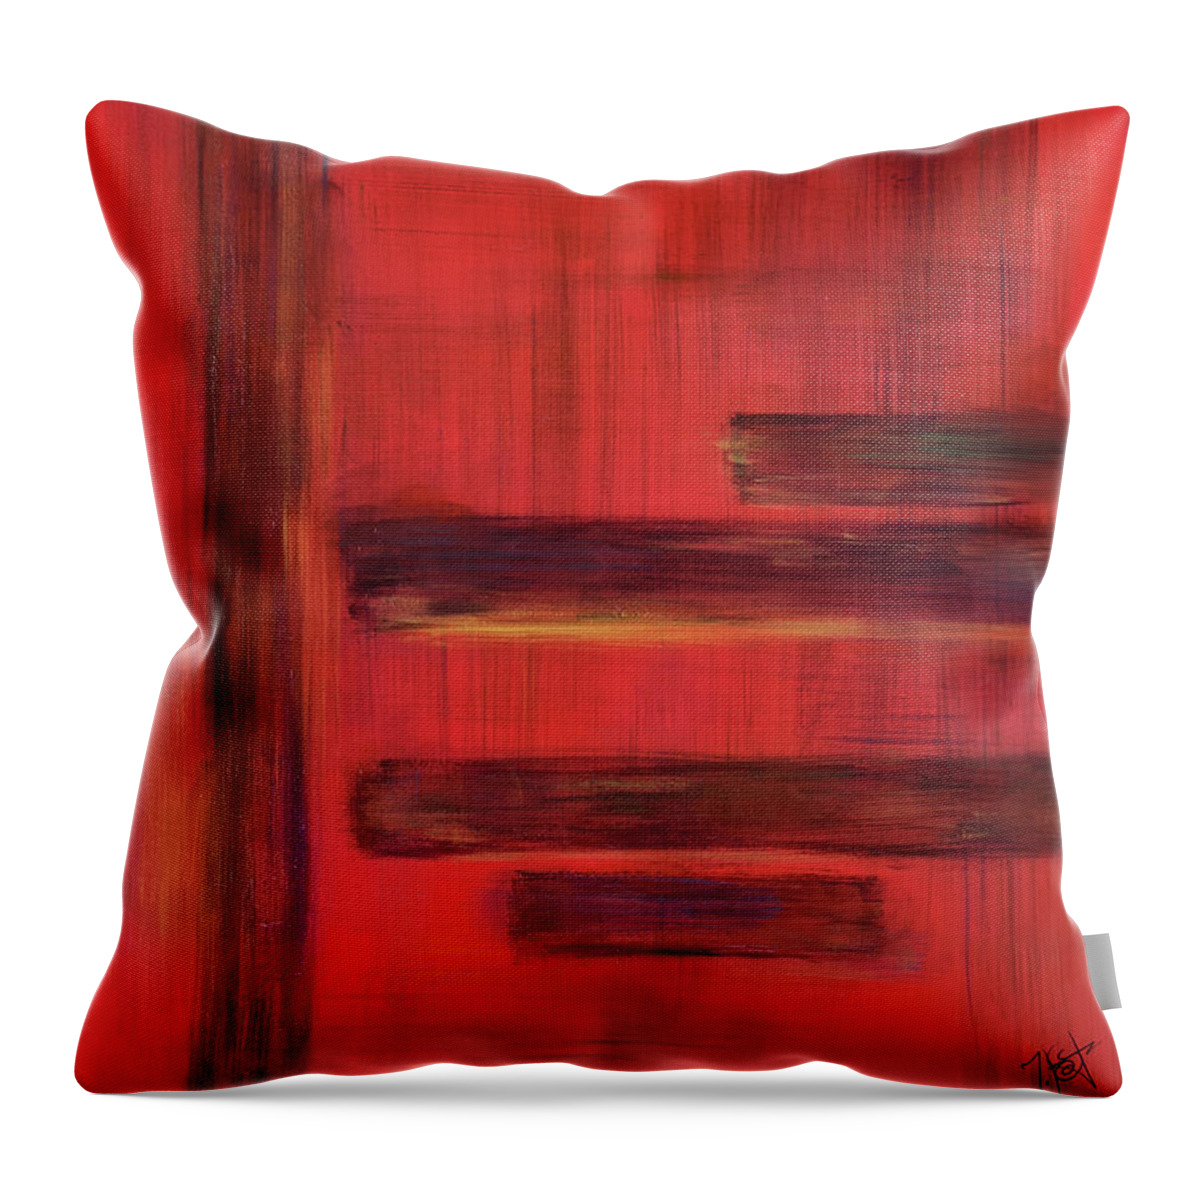 Abstract Throw Pillow featuring the painting Serenity by Tes Scholtz